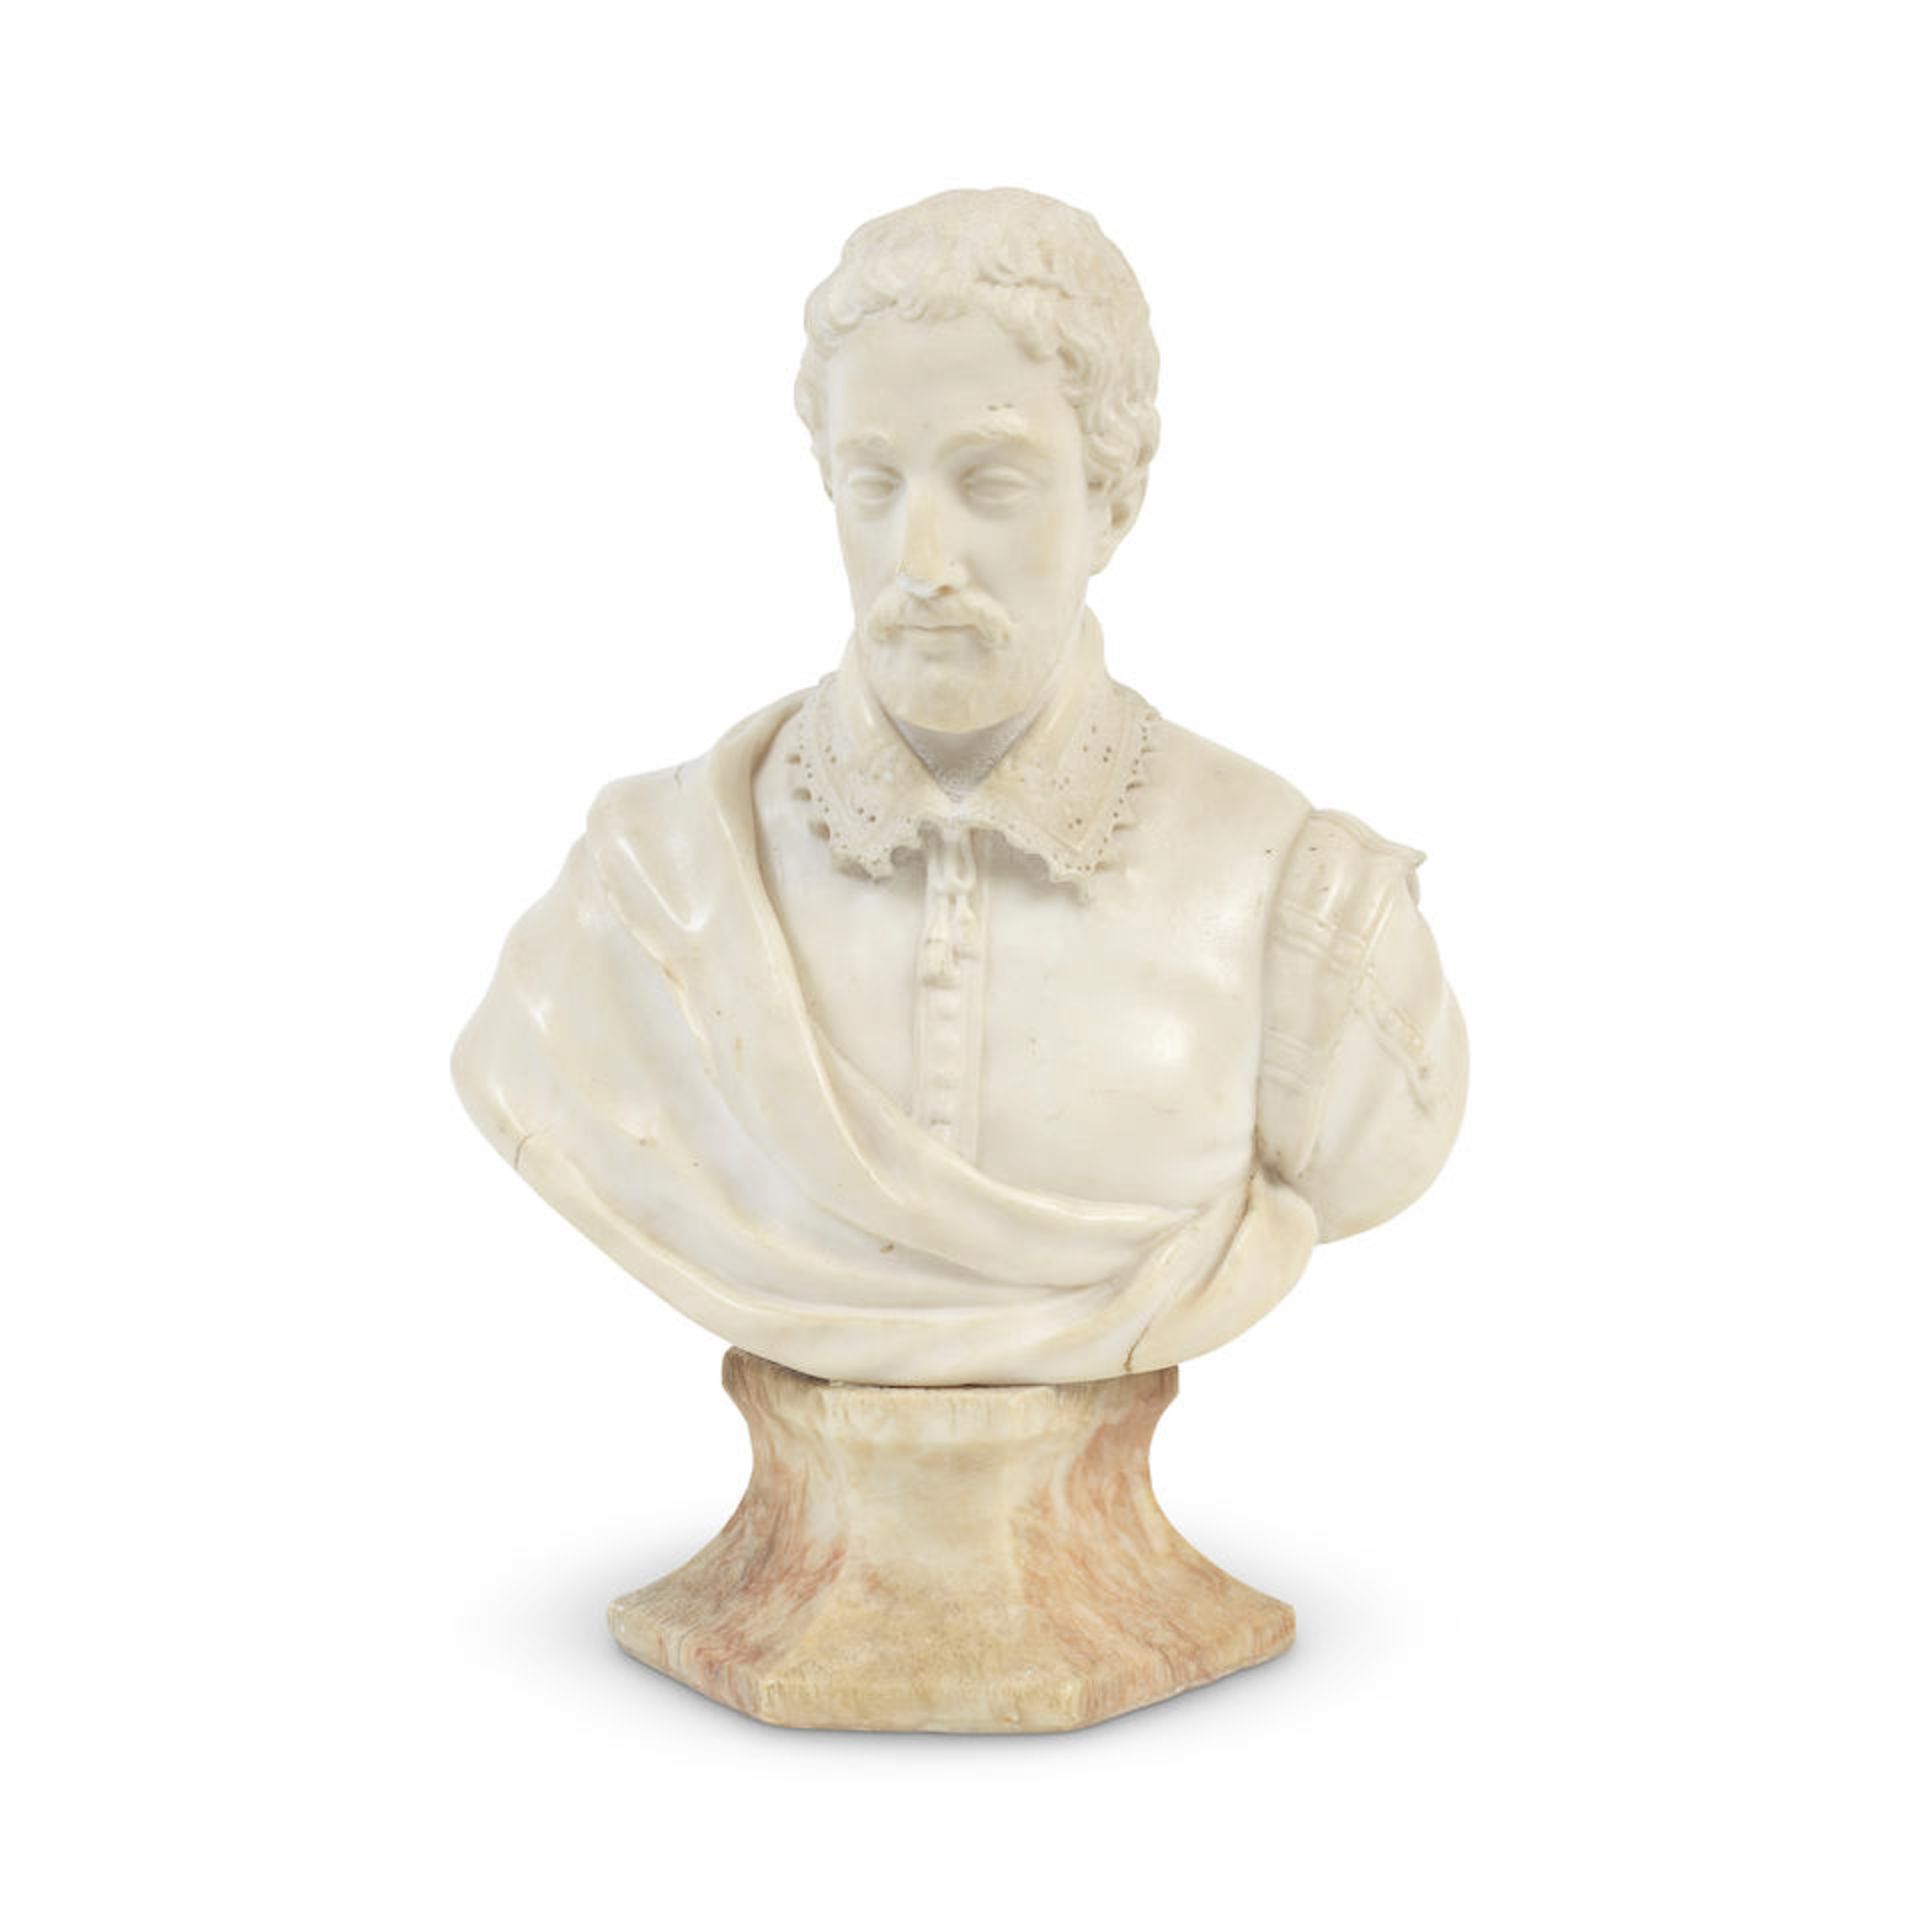 A carved white marble bust of a gentleman in 17th century dress, possibly Henri IVprobably Frenc...